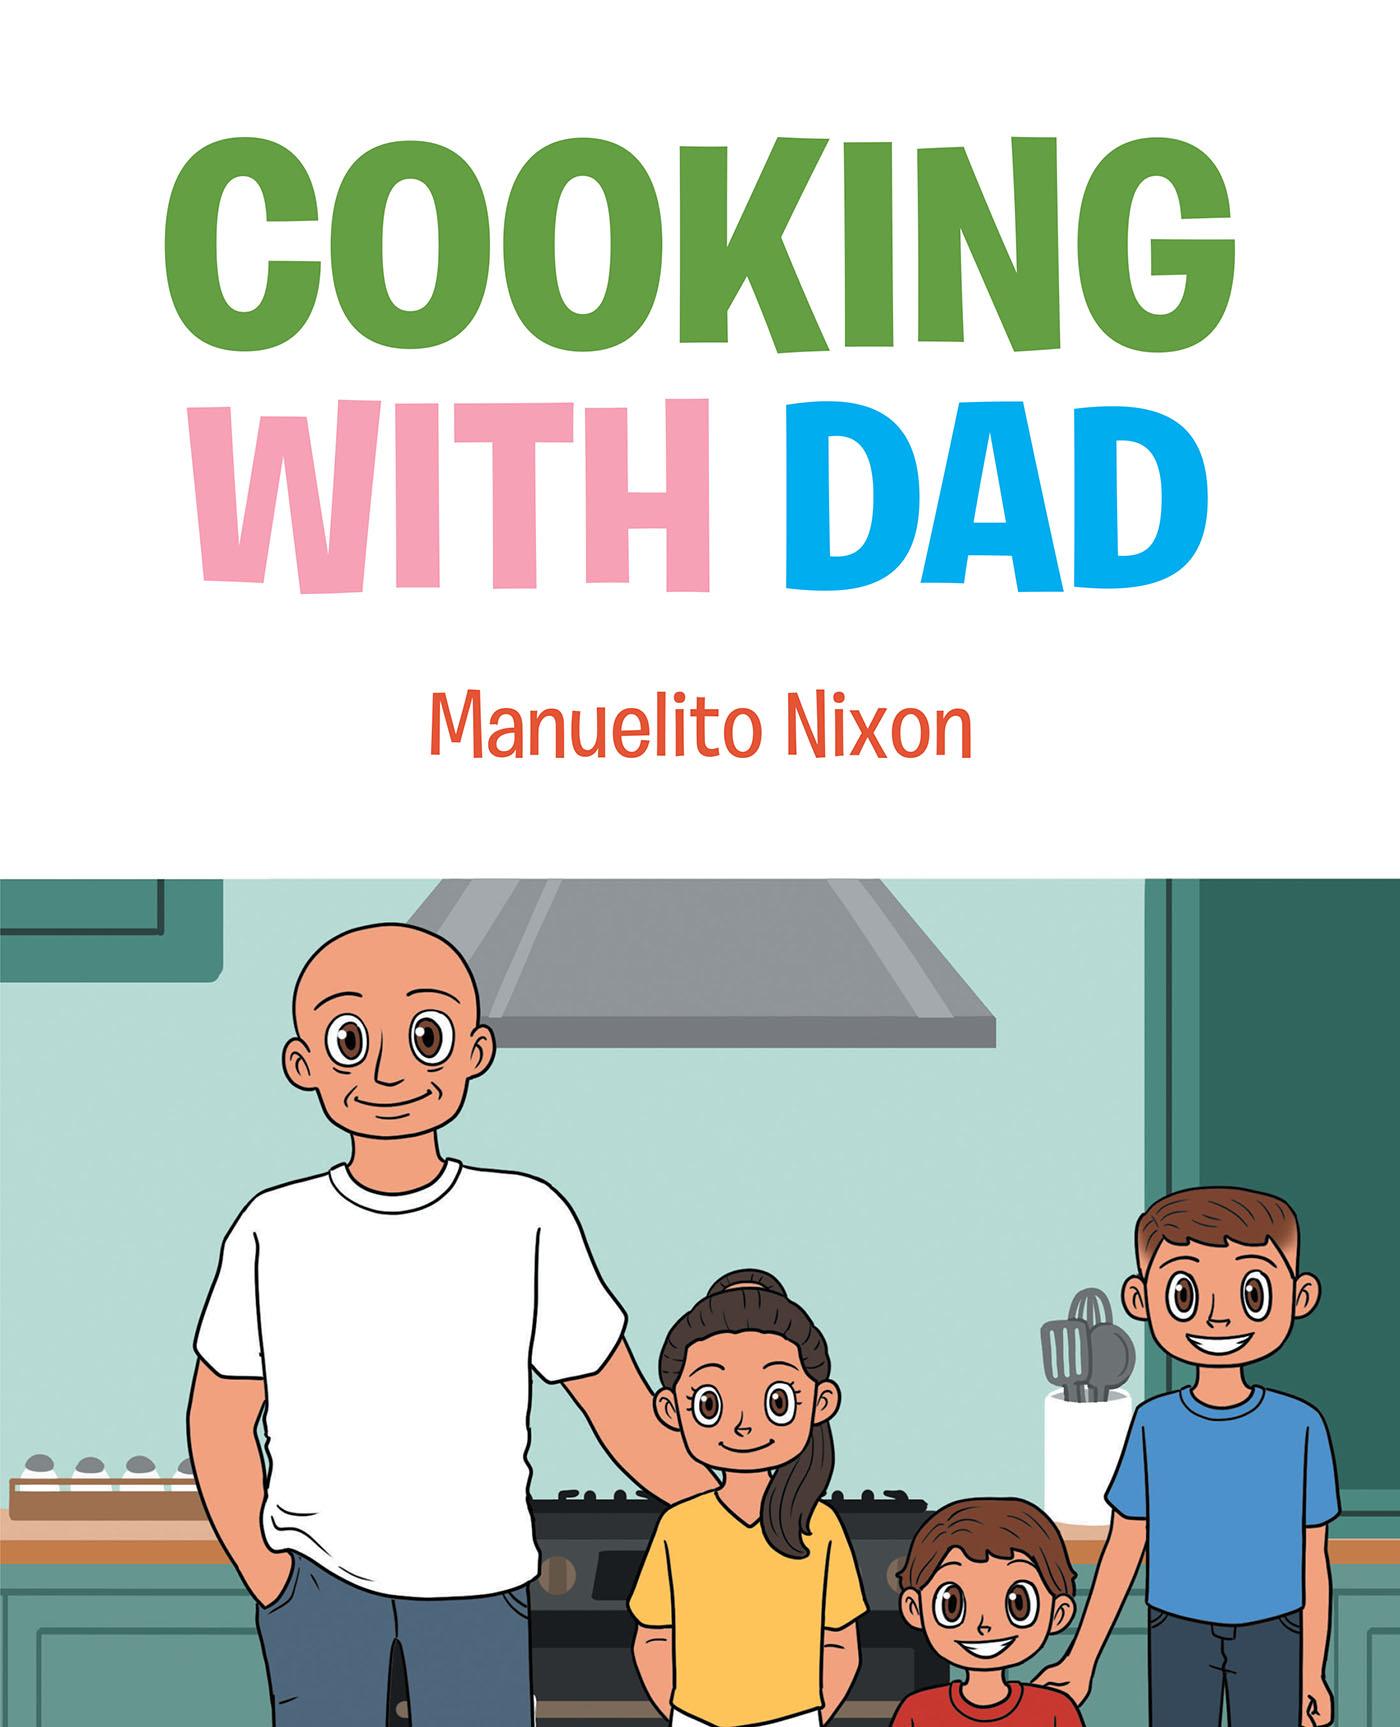 Author Manuelito Nixon’s New Book, "Cooking with Dad," is About a Father and His Children and the Fun Time They Have Preparing a Meal Together